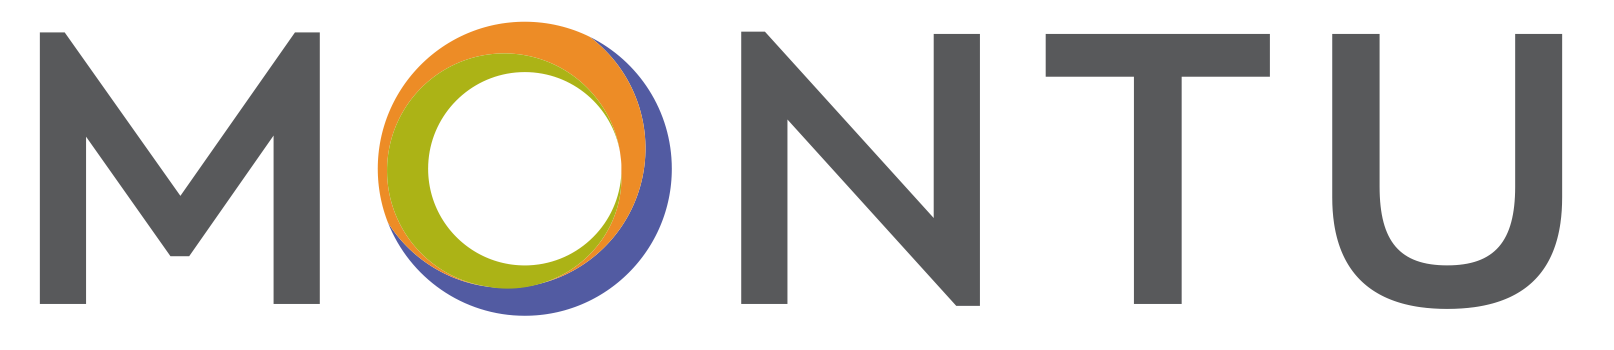 logo with a transparent background.png